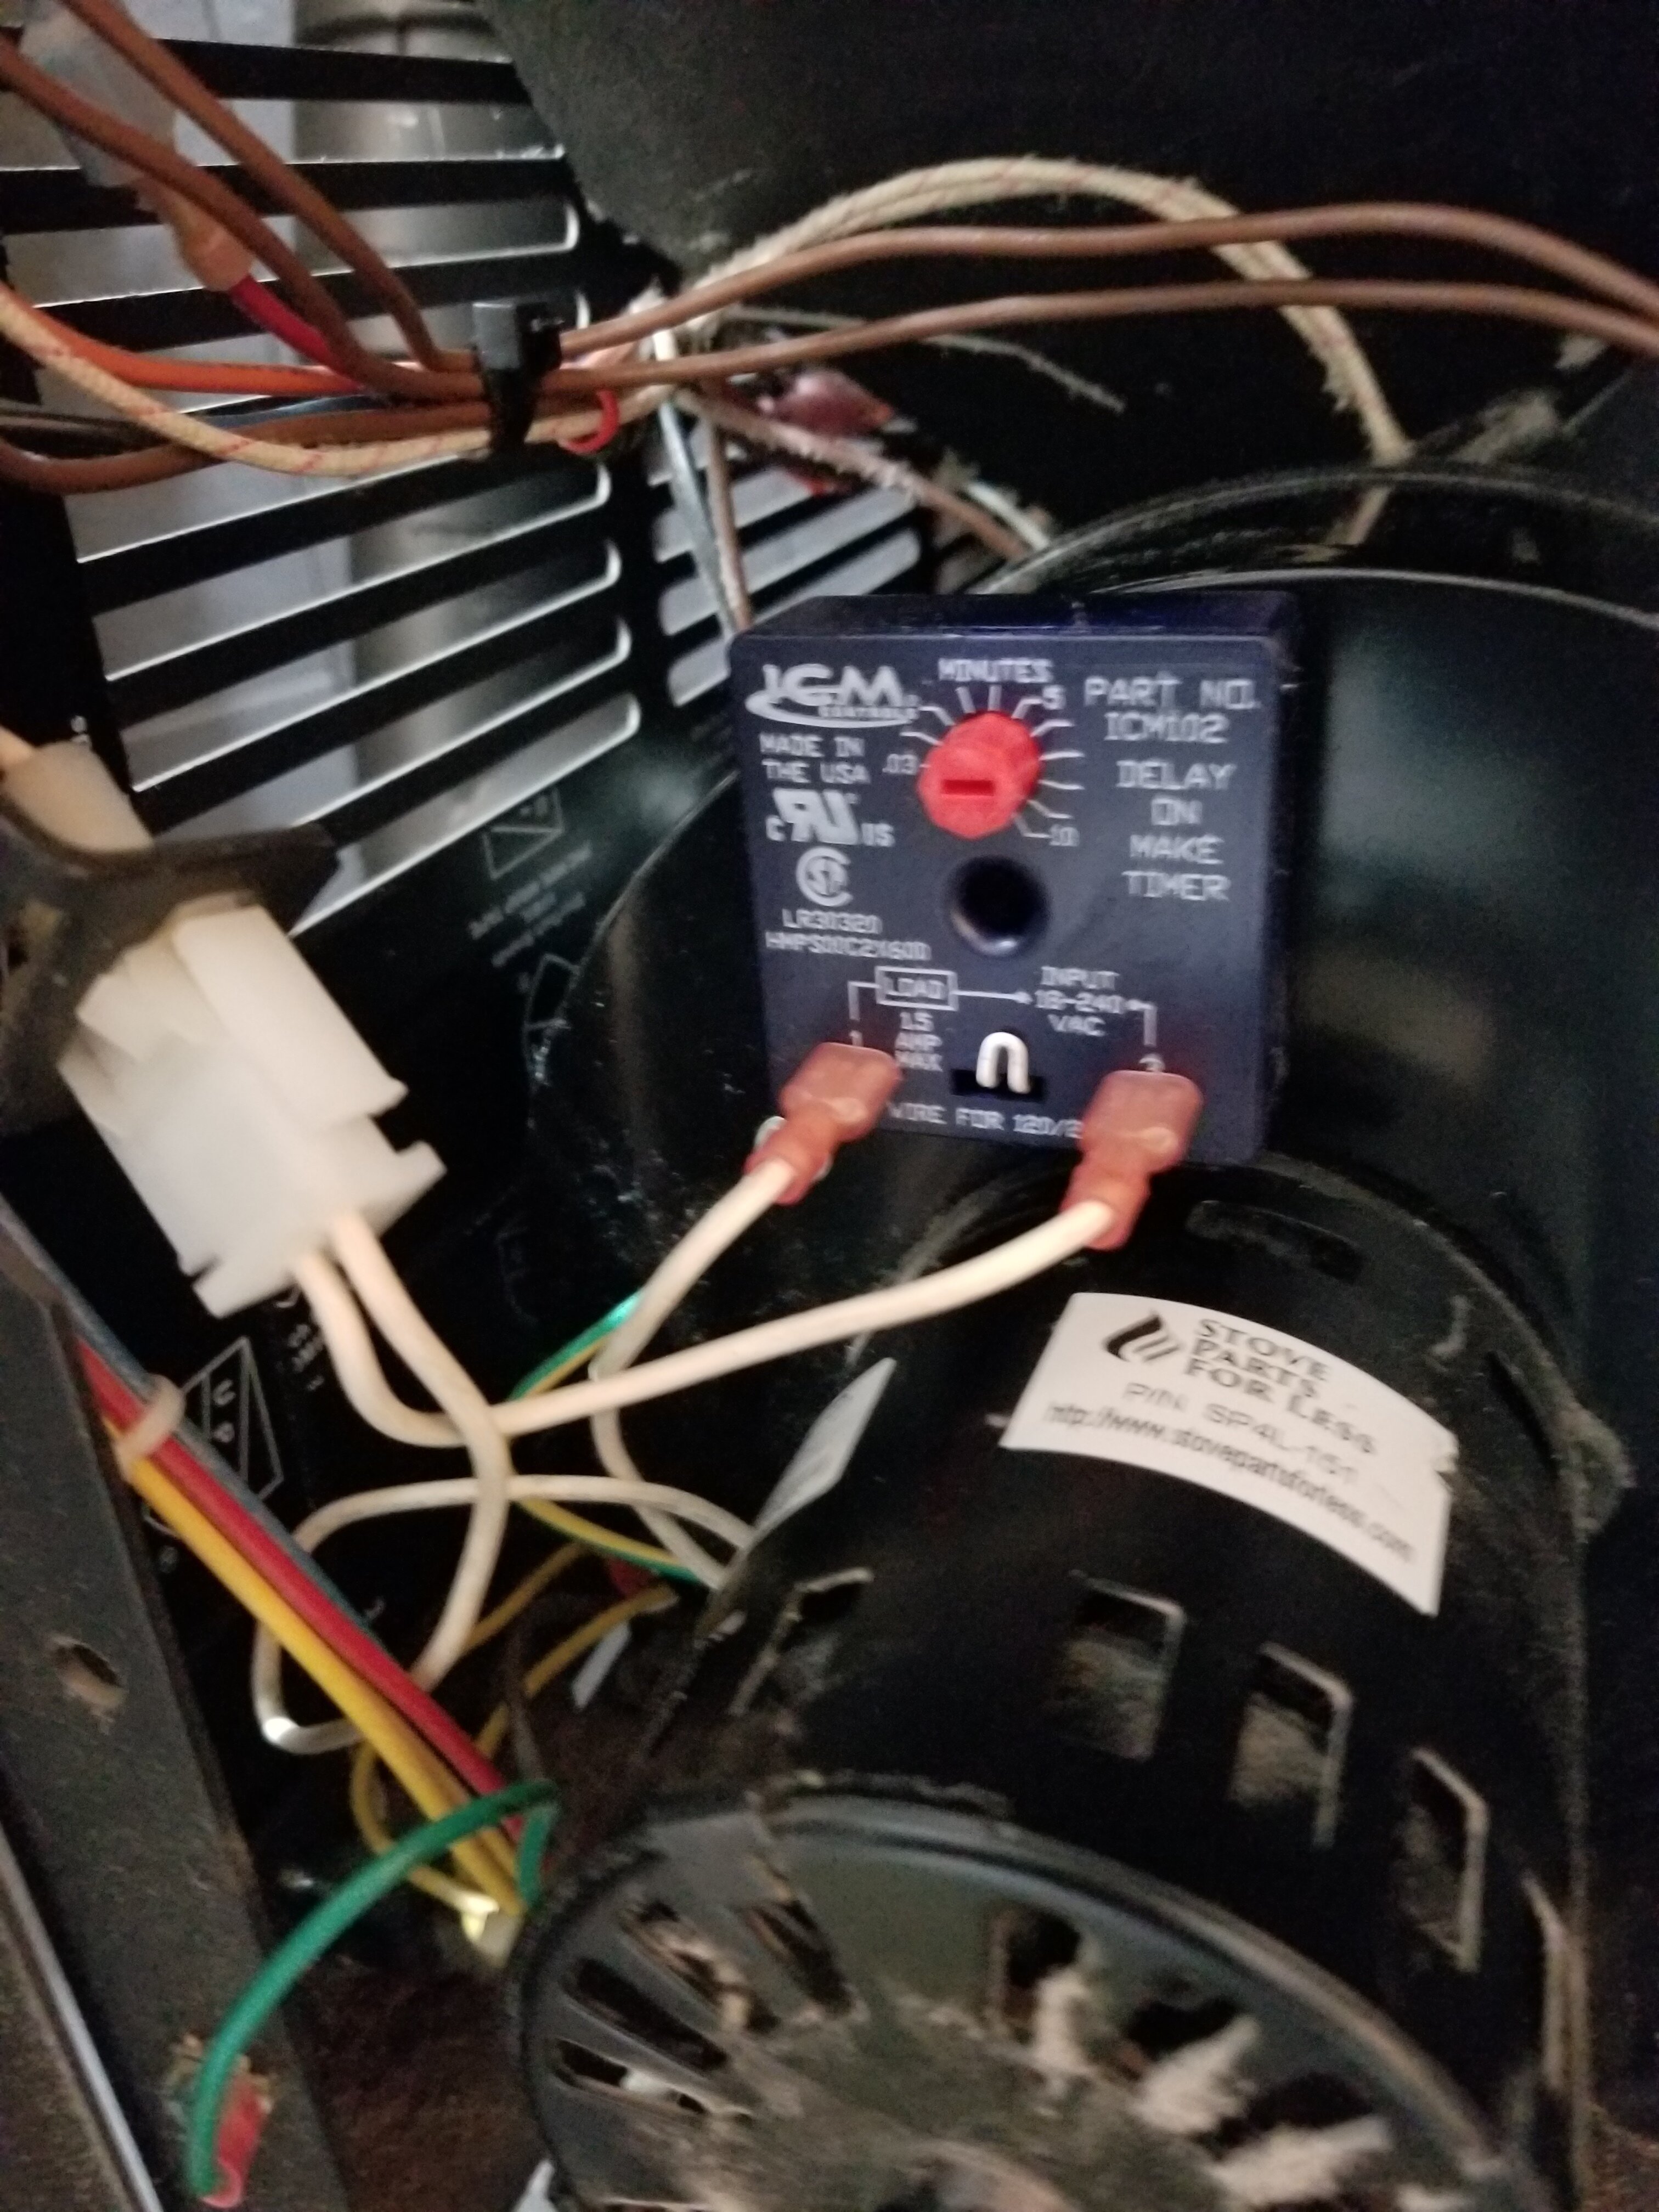 Room Fan turns on at Cold Start Up